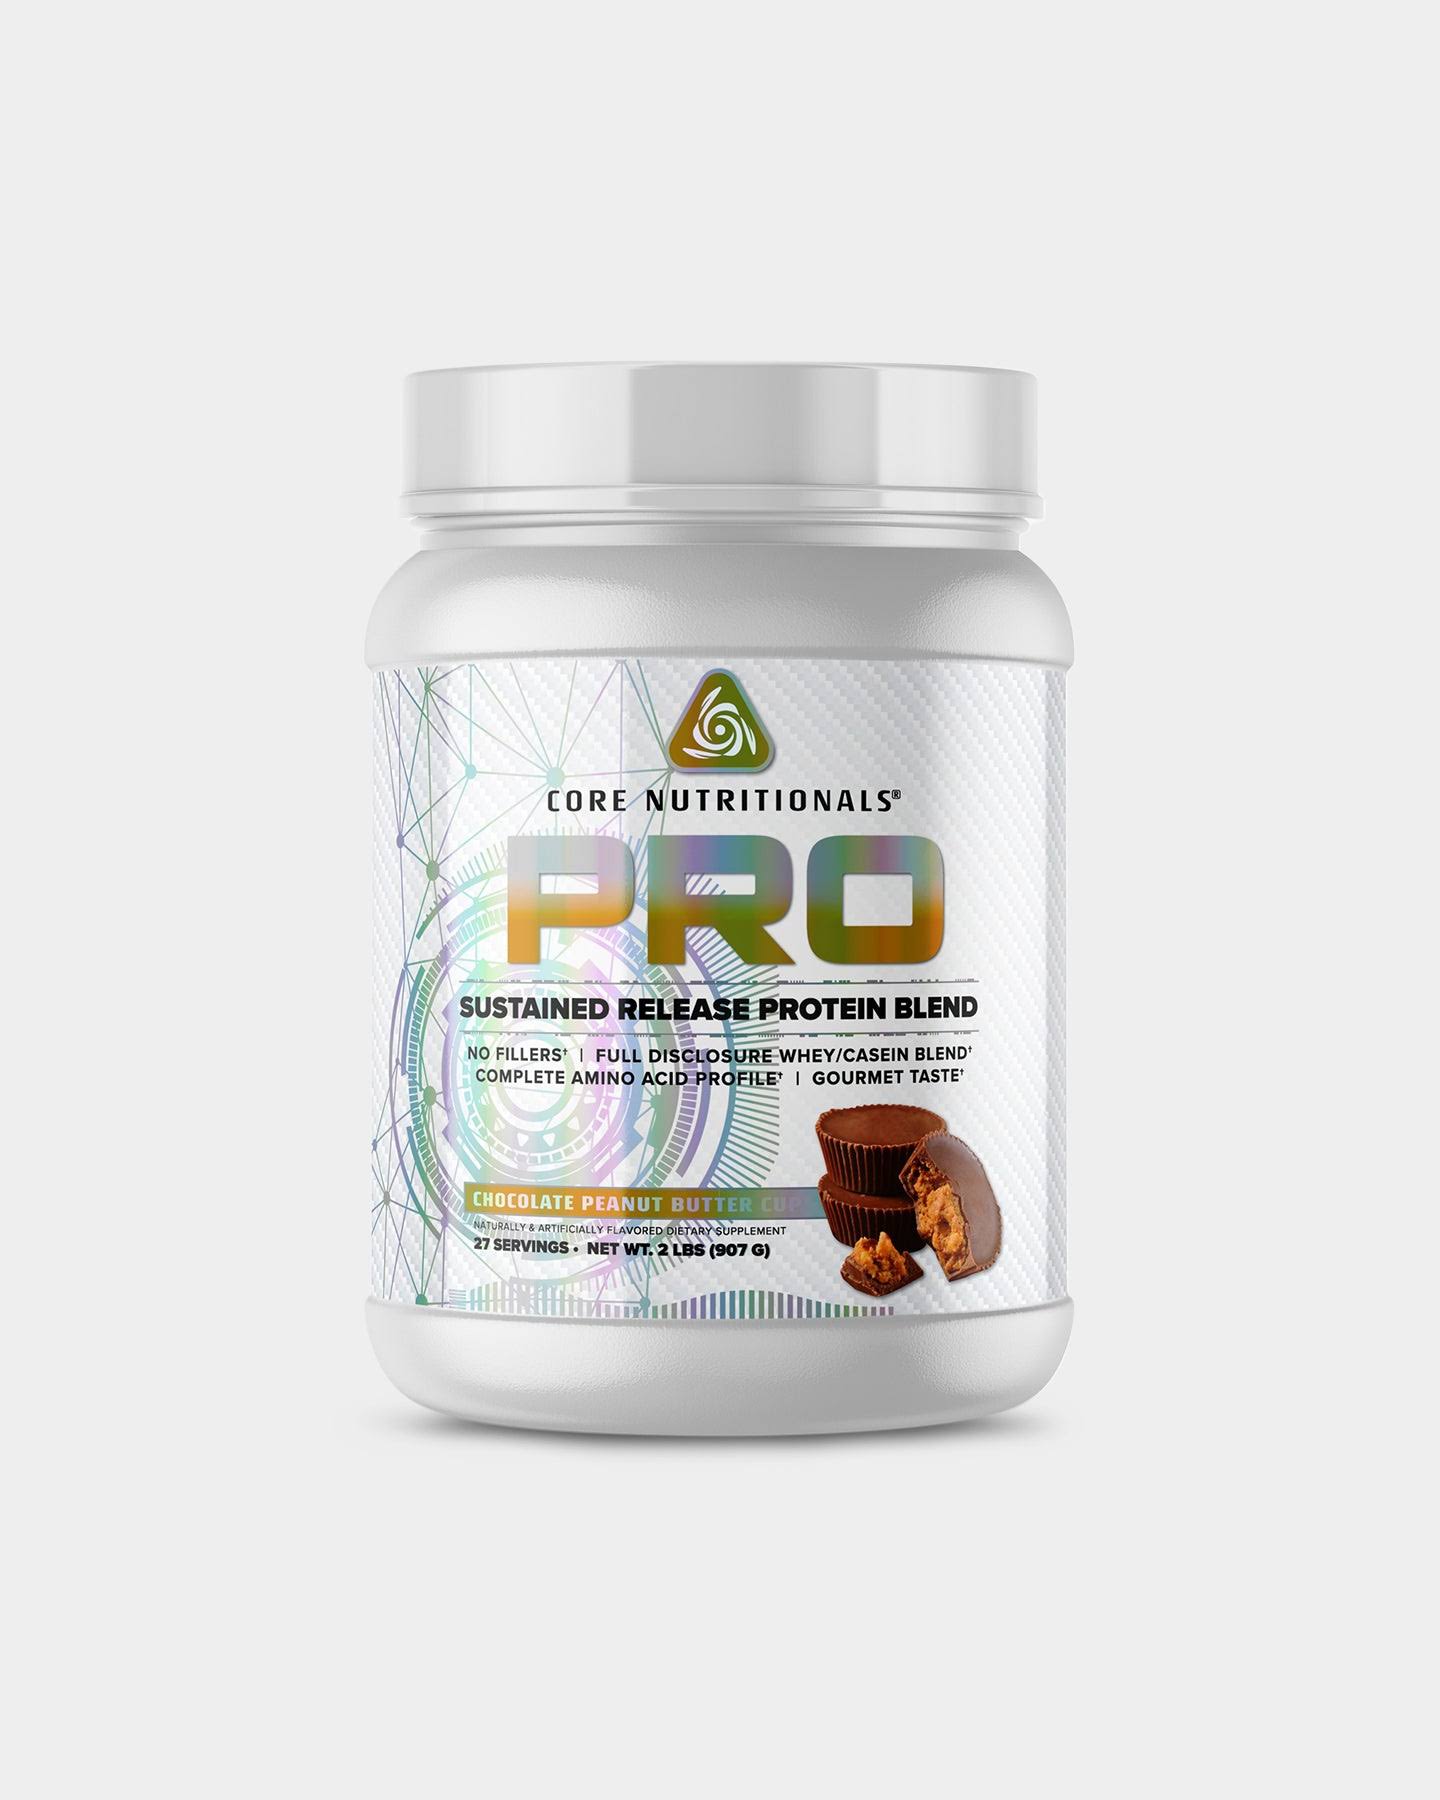 Core Nutritionals Core PRO Protein Blend in Chocolate Peanut Butter Cup | 907 Grams